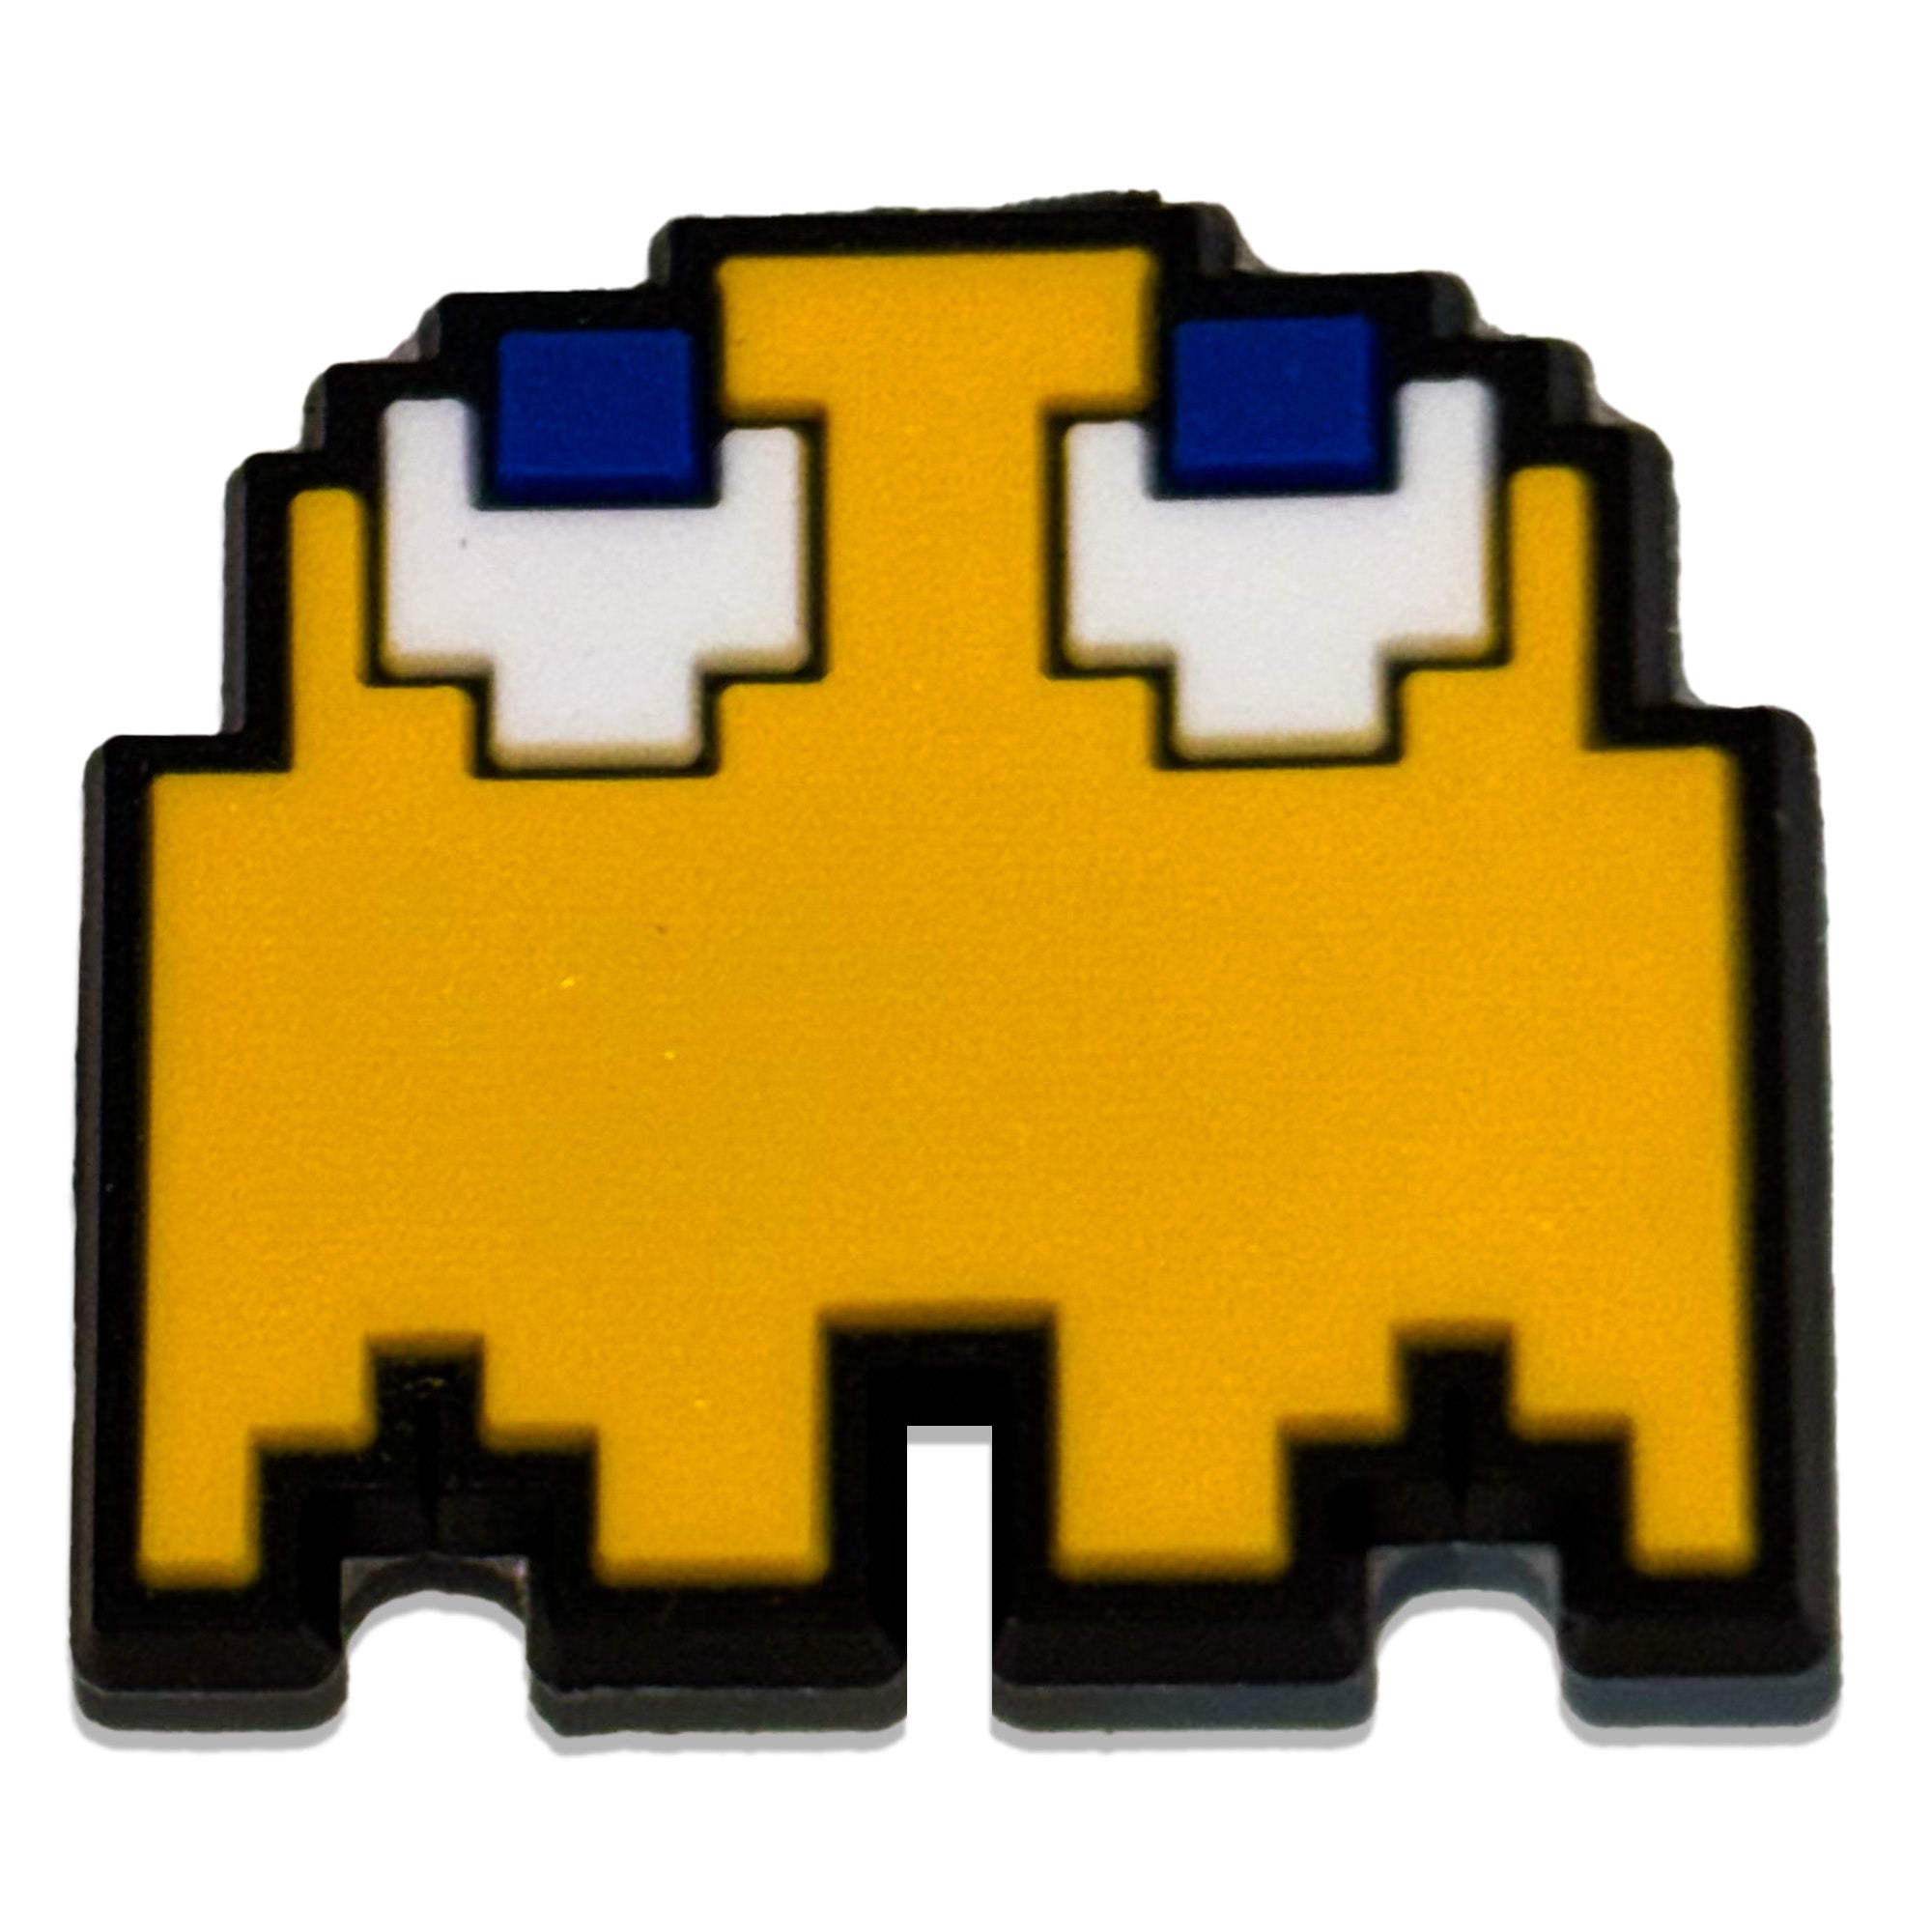 Pack - Man Yellow : Shoe Charm - Questsole